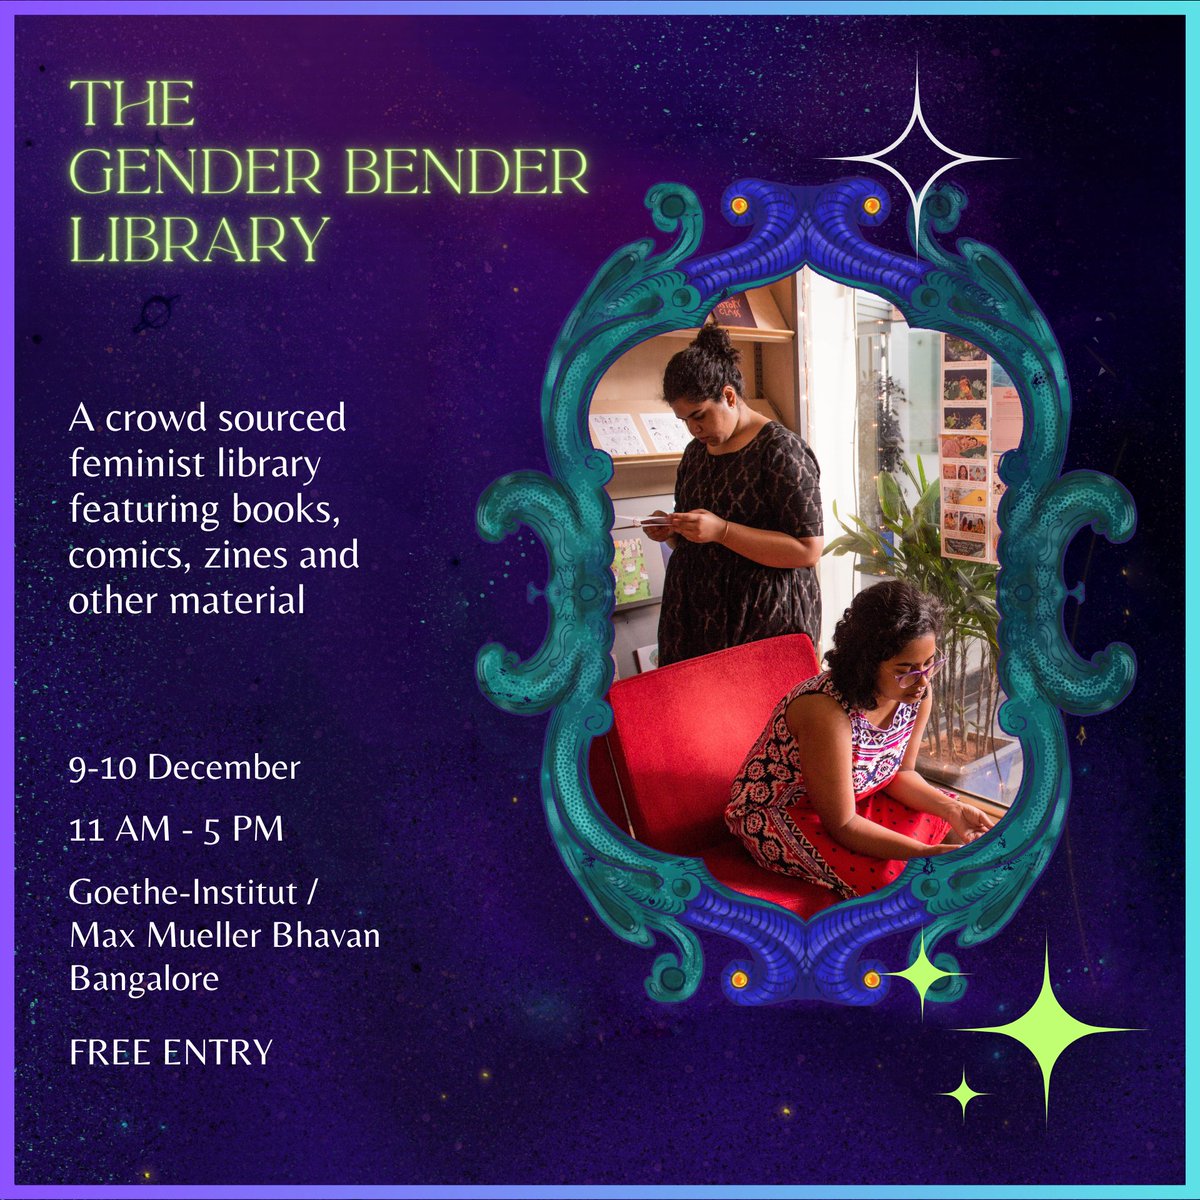 Introducing the Gender Bender Library- A crowd sourced feminist library featuring books, comics, zines and other material. Open all day for people to browse, read, listen to talks and discuss anything and everything to do with books and literature.